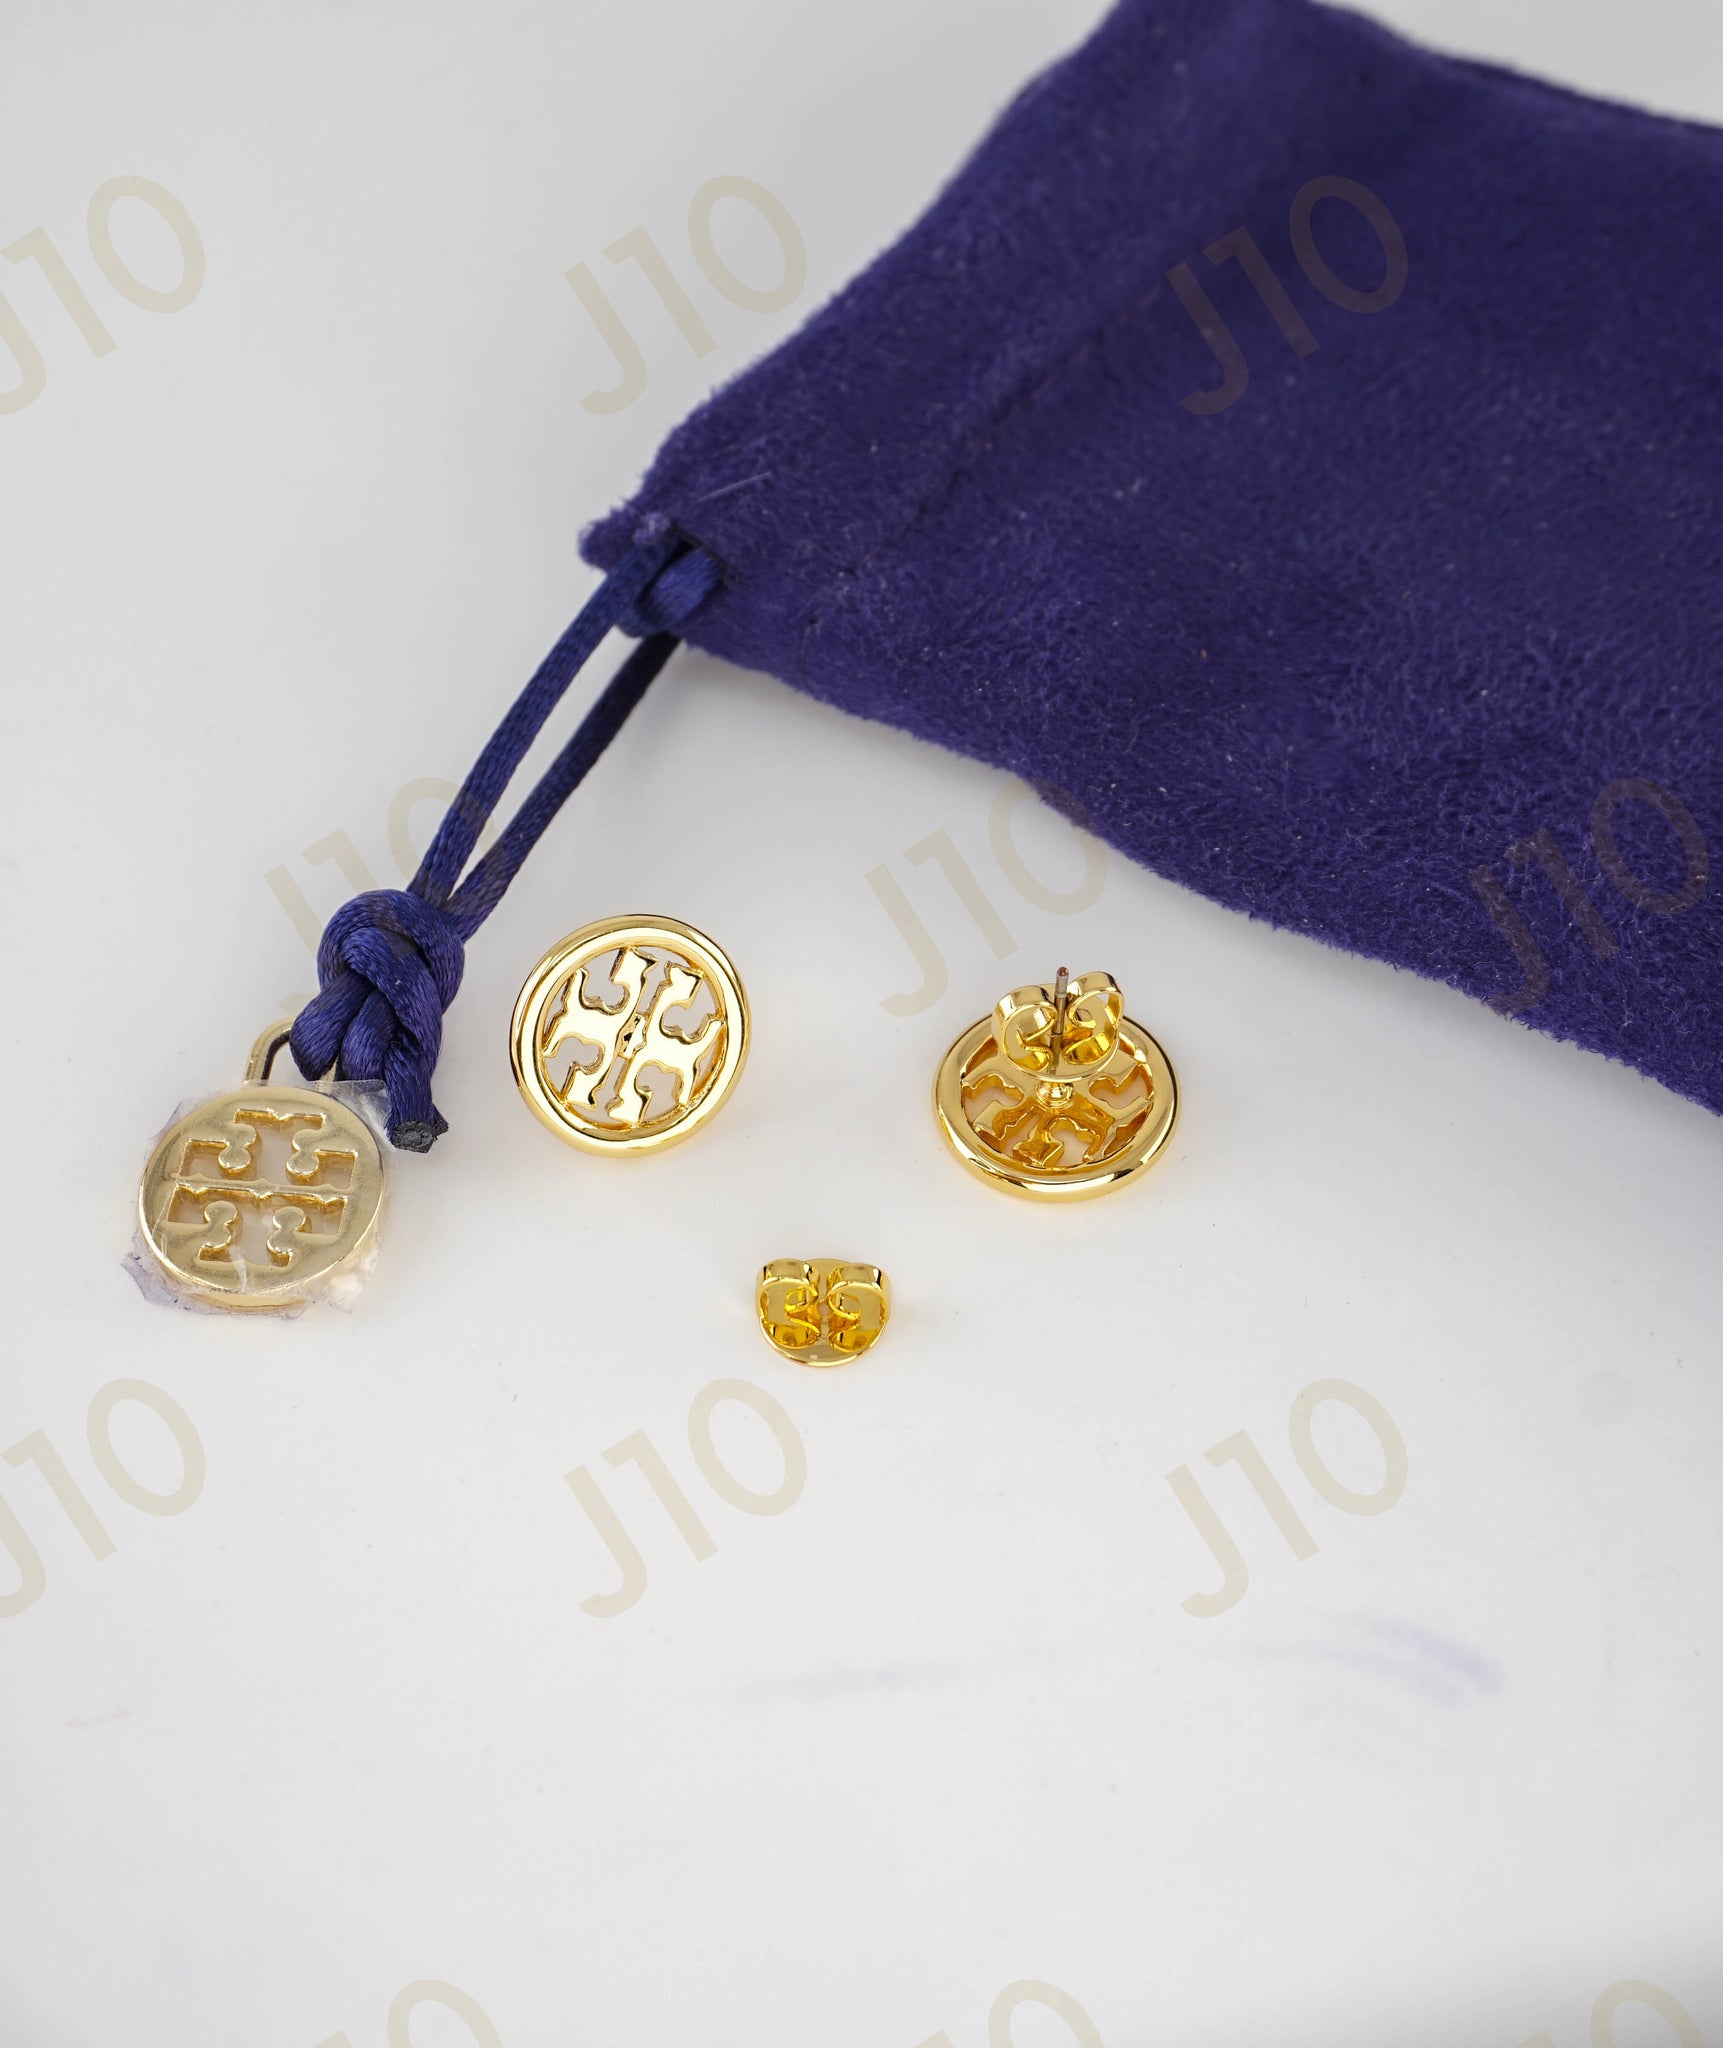 Tory Burch Large Miller Logo Large Stud Earrings in Tory Gold - Brand